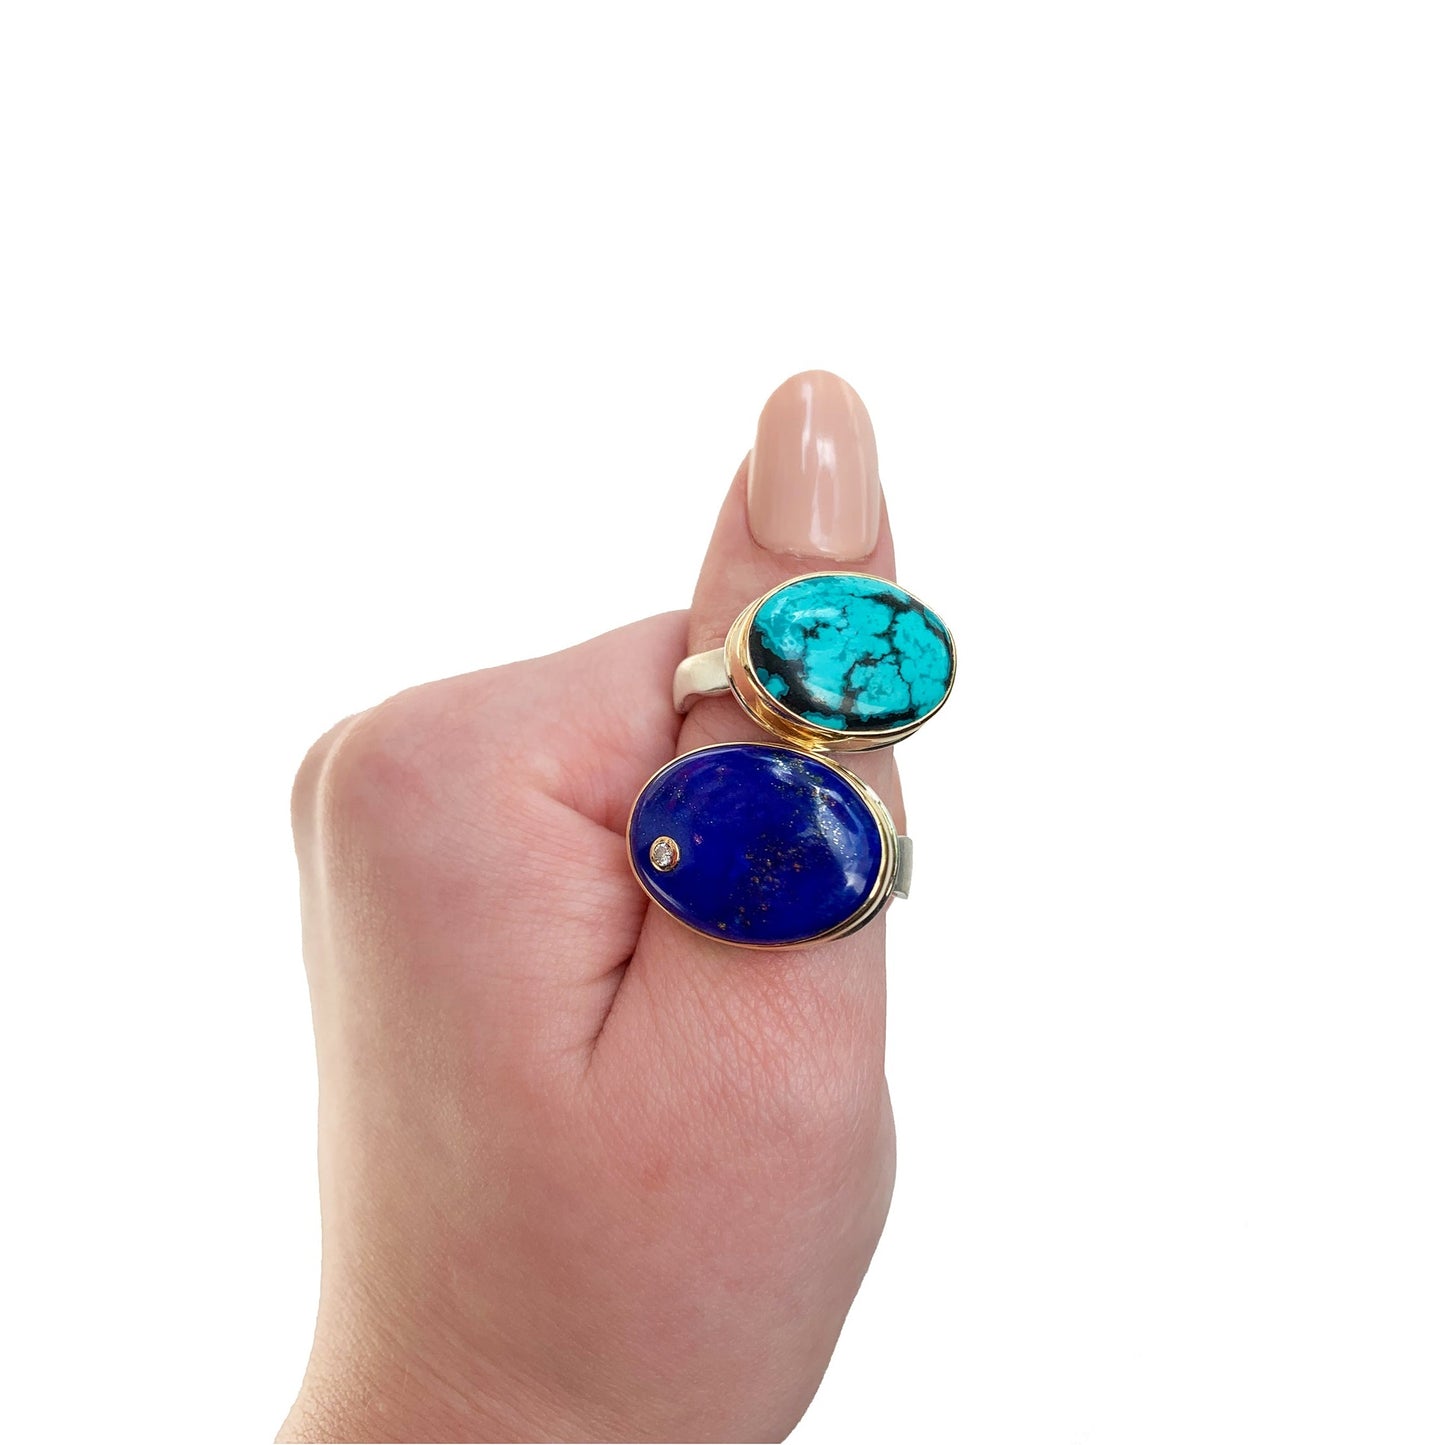 Hubei Turquoise Oval Ring